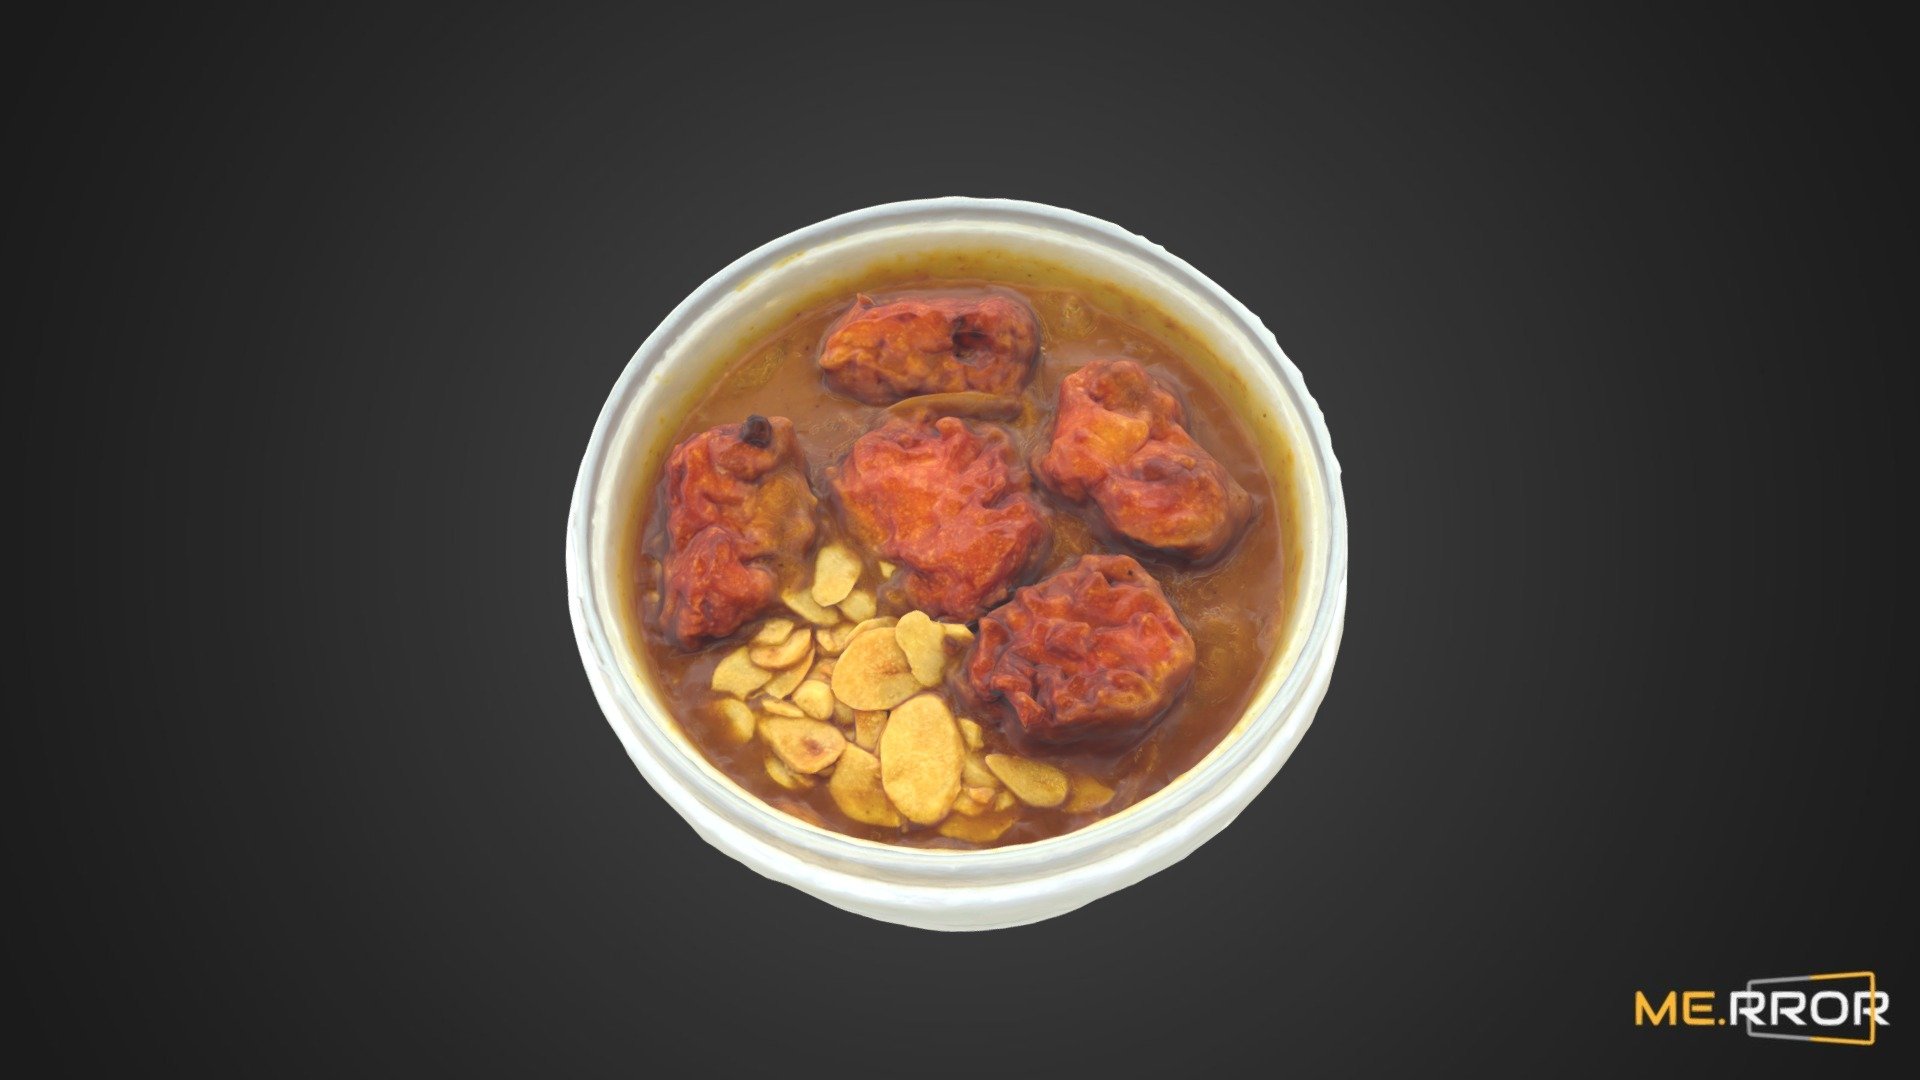 MERROR is a 3D Content PLATFORM which introduces various Asian assets to the 3D world


3DScanning #Photogrametry #ME.RROR - Karaage Curry - Buy Royalty Free 3D model by ME.RROR Studio (@merror) 3d model